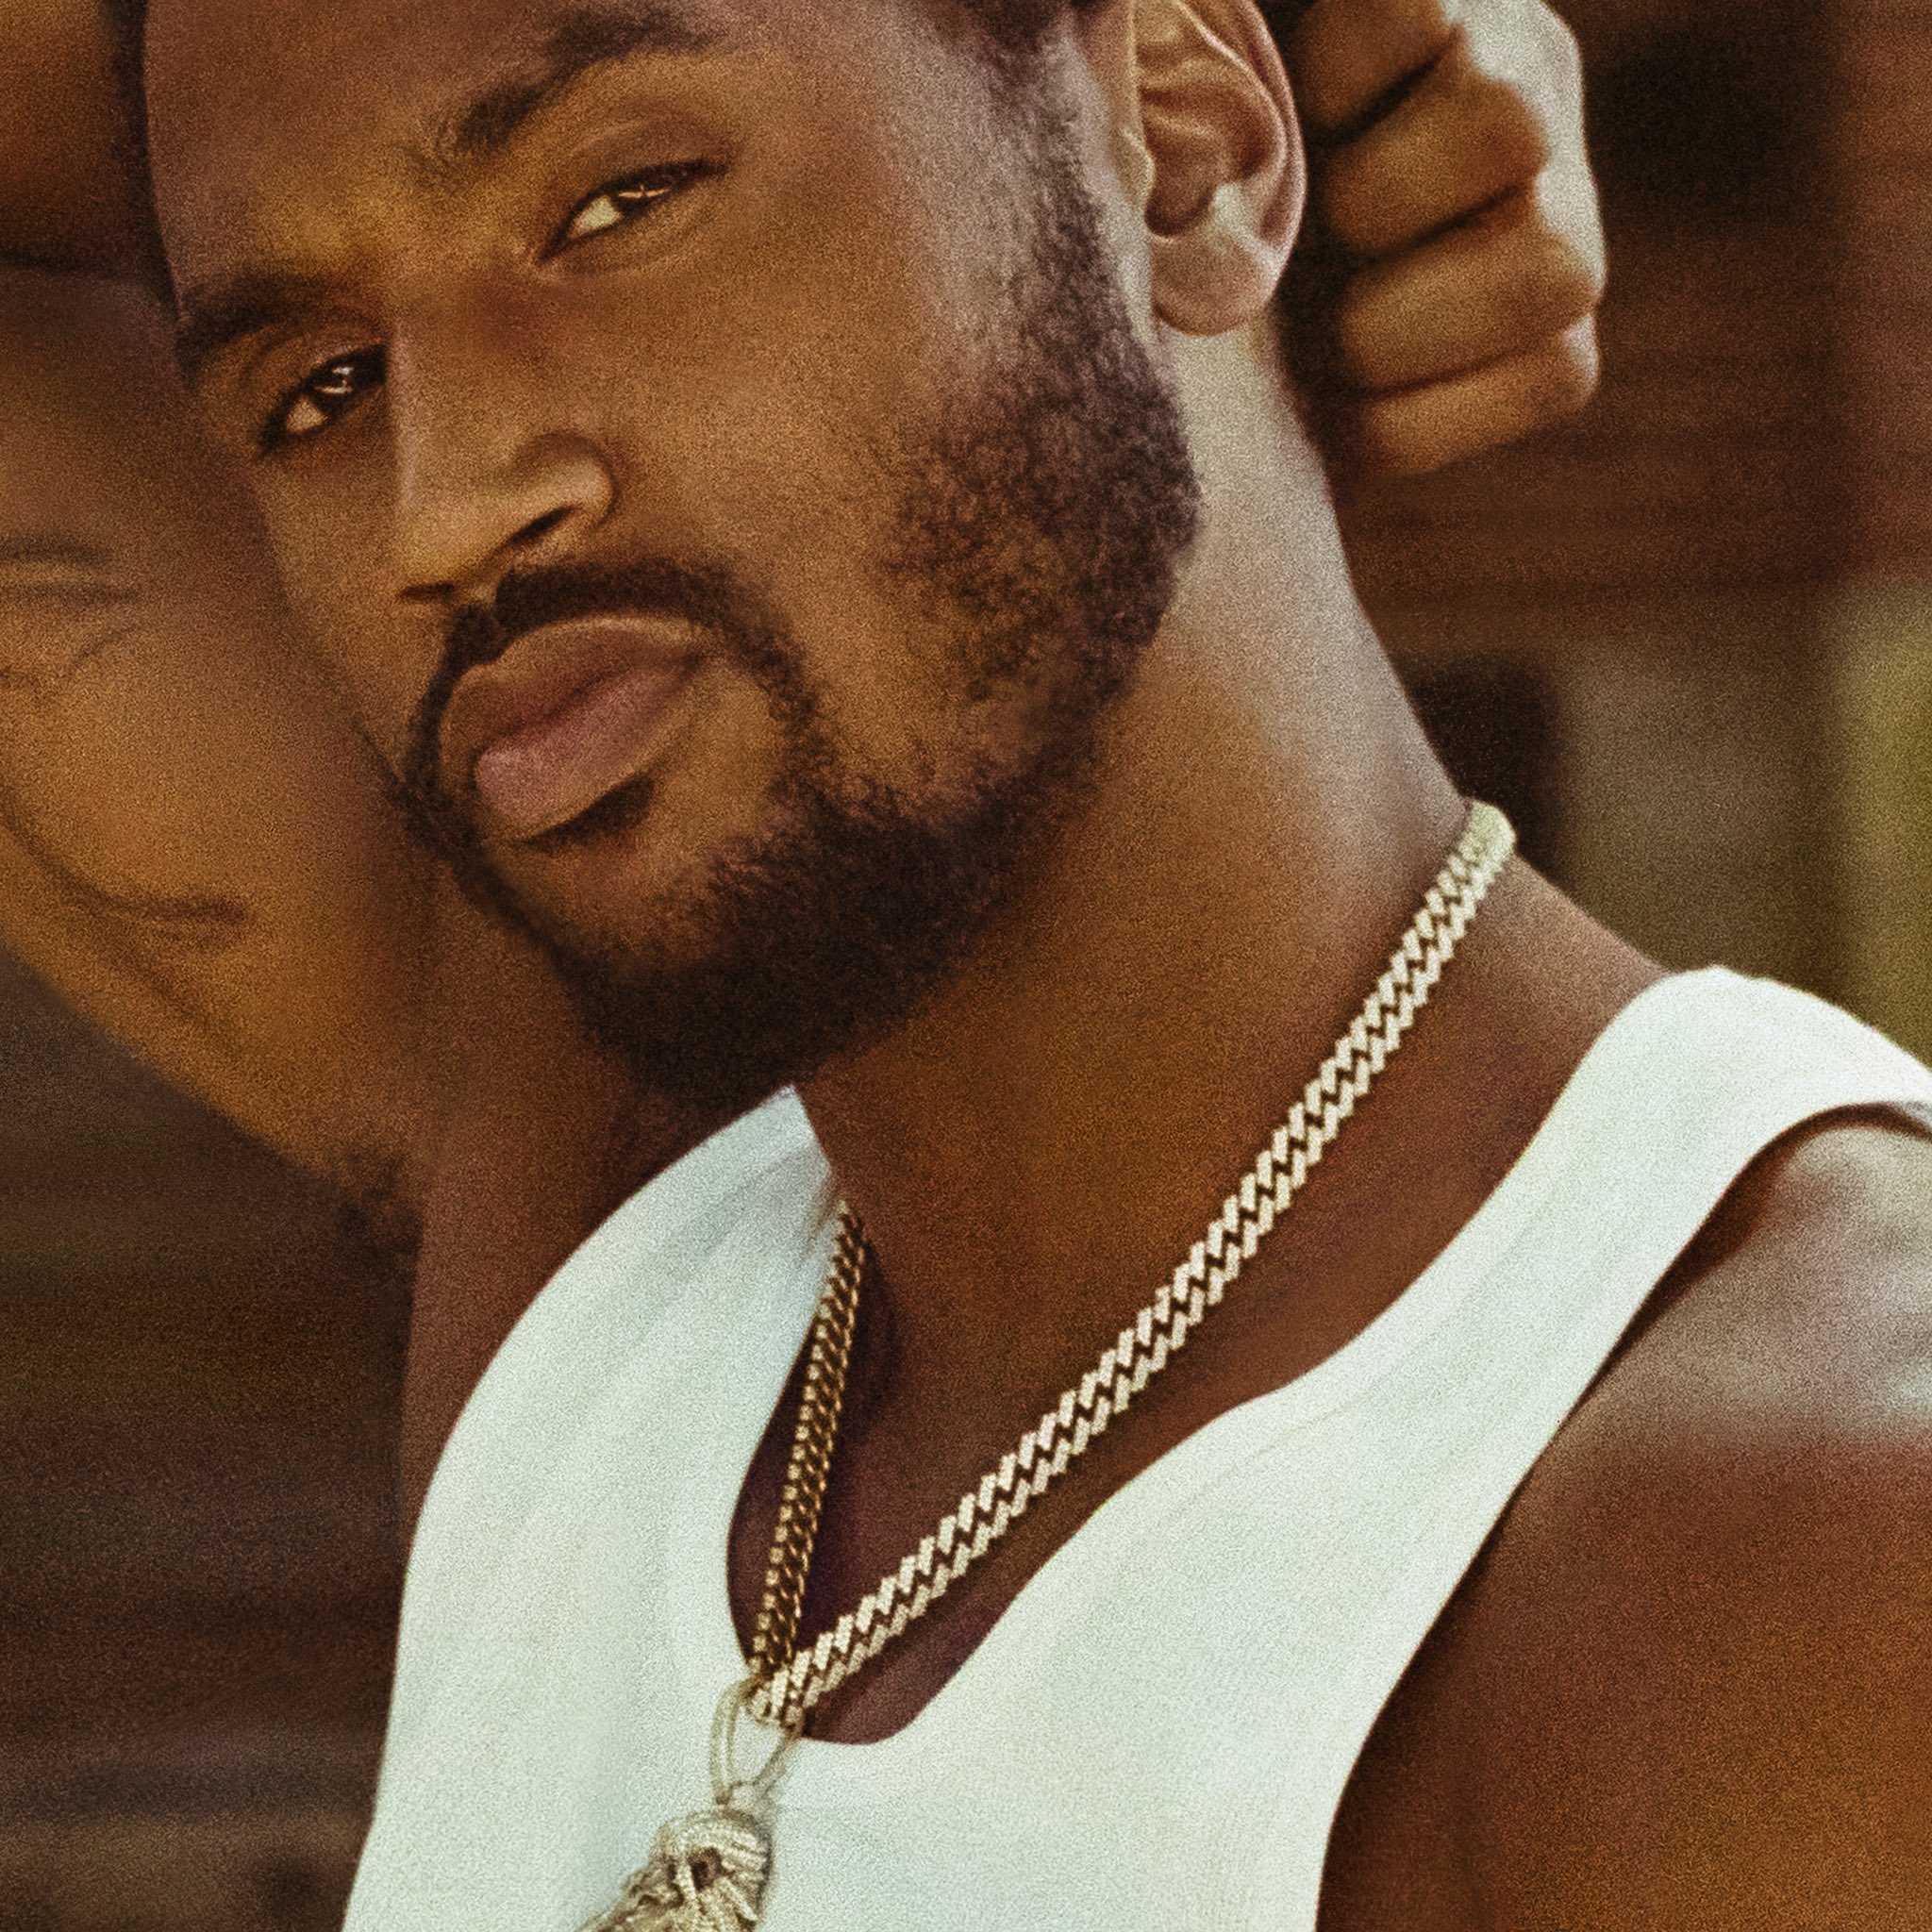 Trey Songz Releases "Two Ways" and Announces Date For Upcoming Album "Back Home"